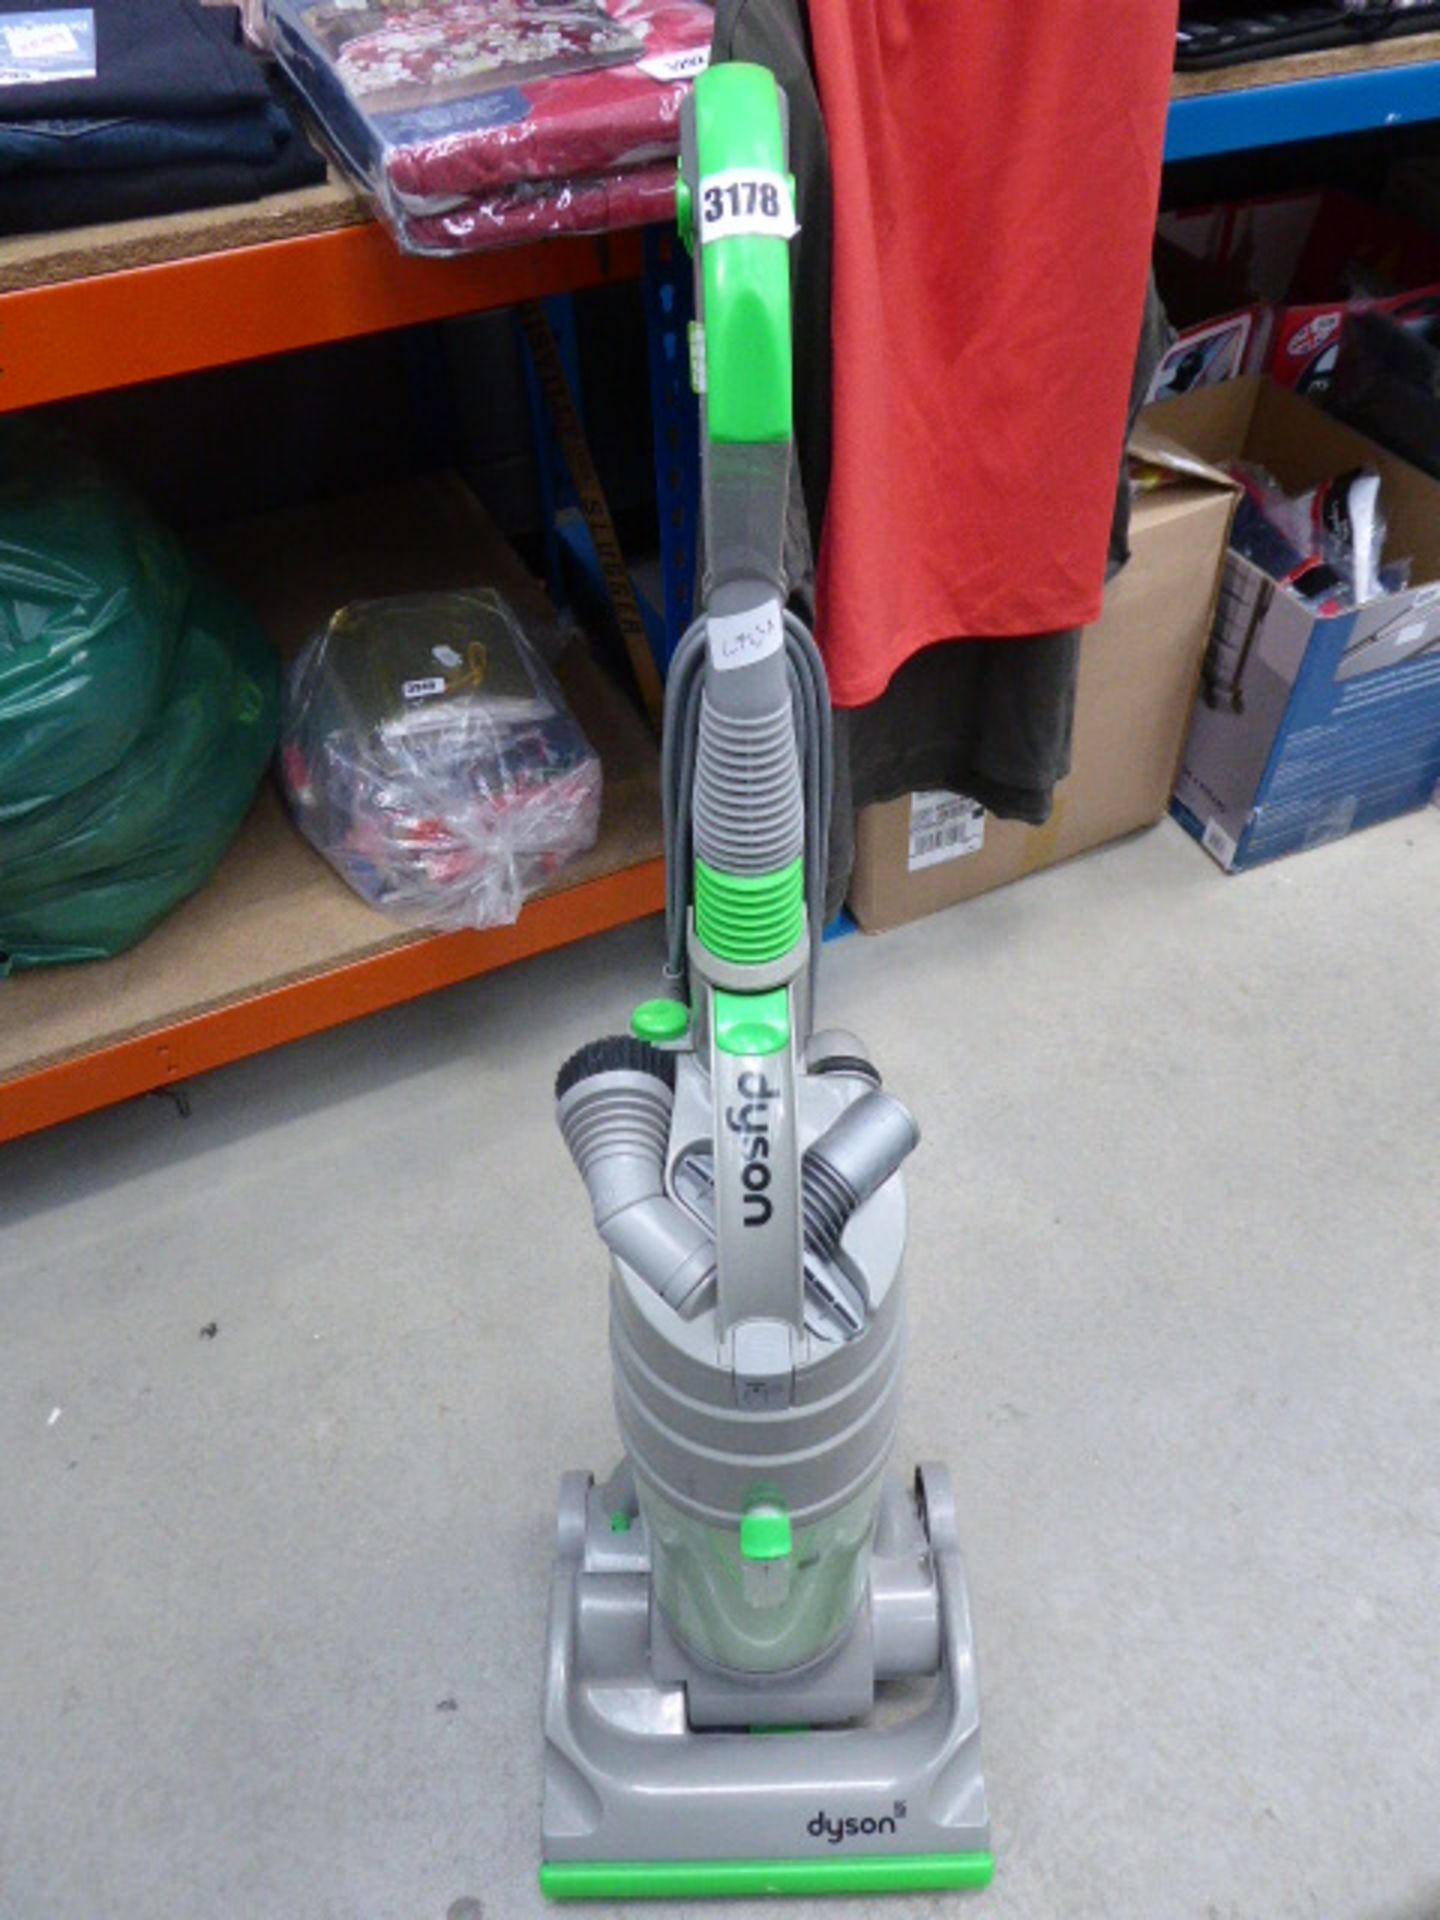 Upright Dyson DCO4 vacuum cleaner